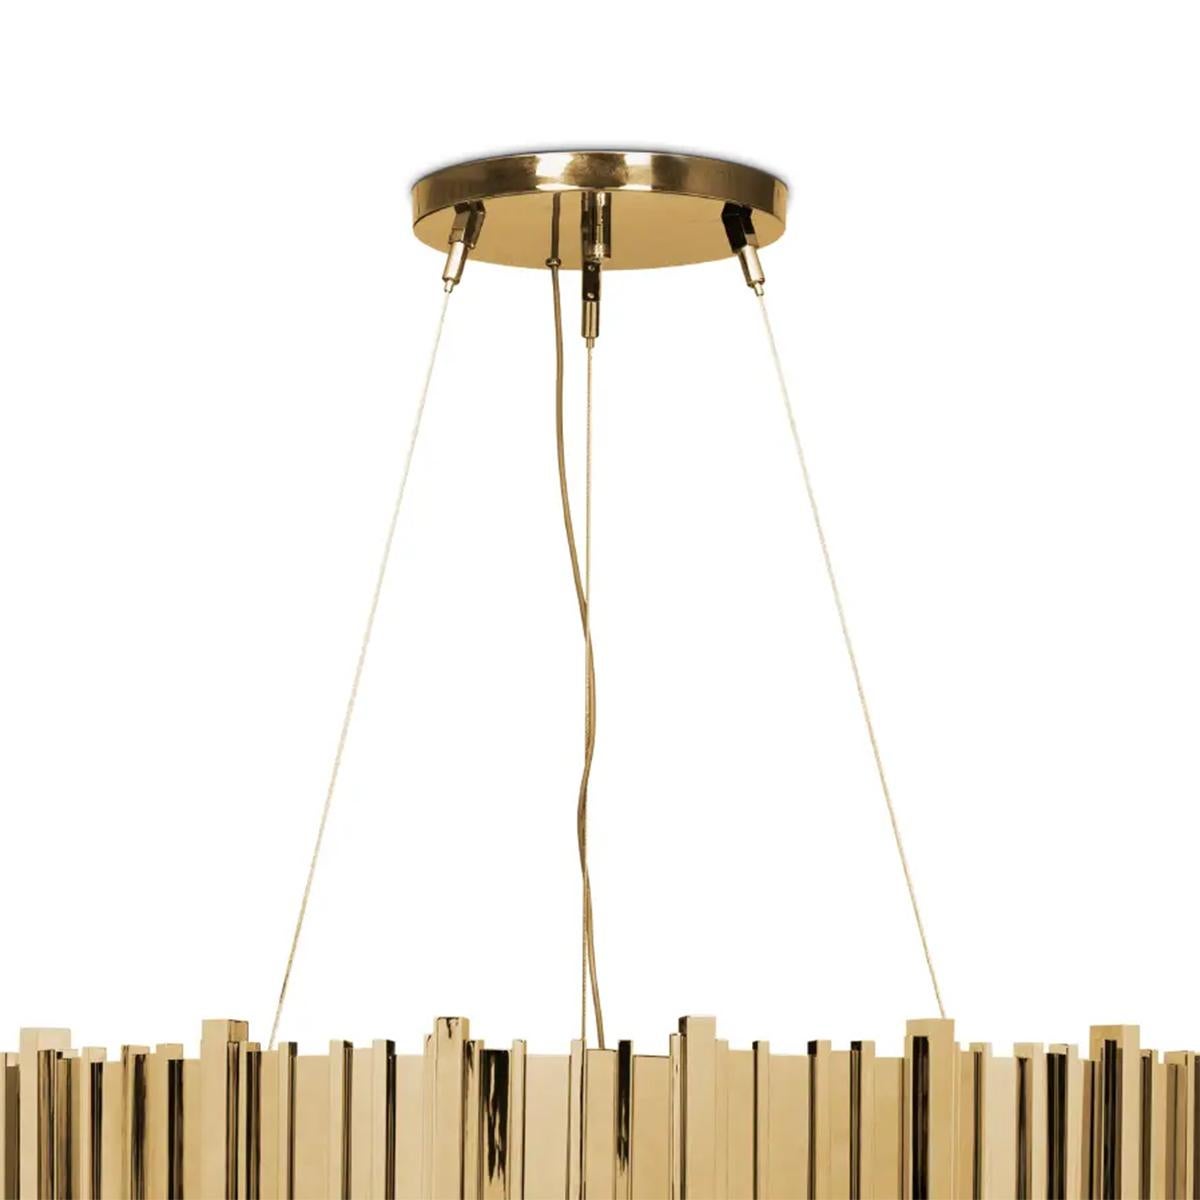 Chandelier Ambassador Medium with crystal glass pendants.
With 2 circular rows of gold plated polished brass rectangular 
sticks. With 24 Halogen bulbs, lamp holder type G9.
20 Watt max, for 220-240V. Bulbs not included.
With steel ropes for